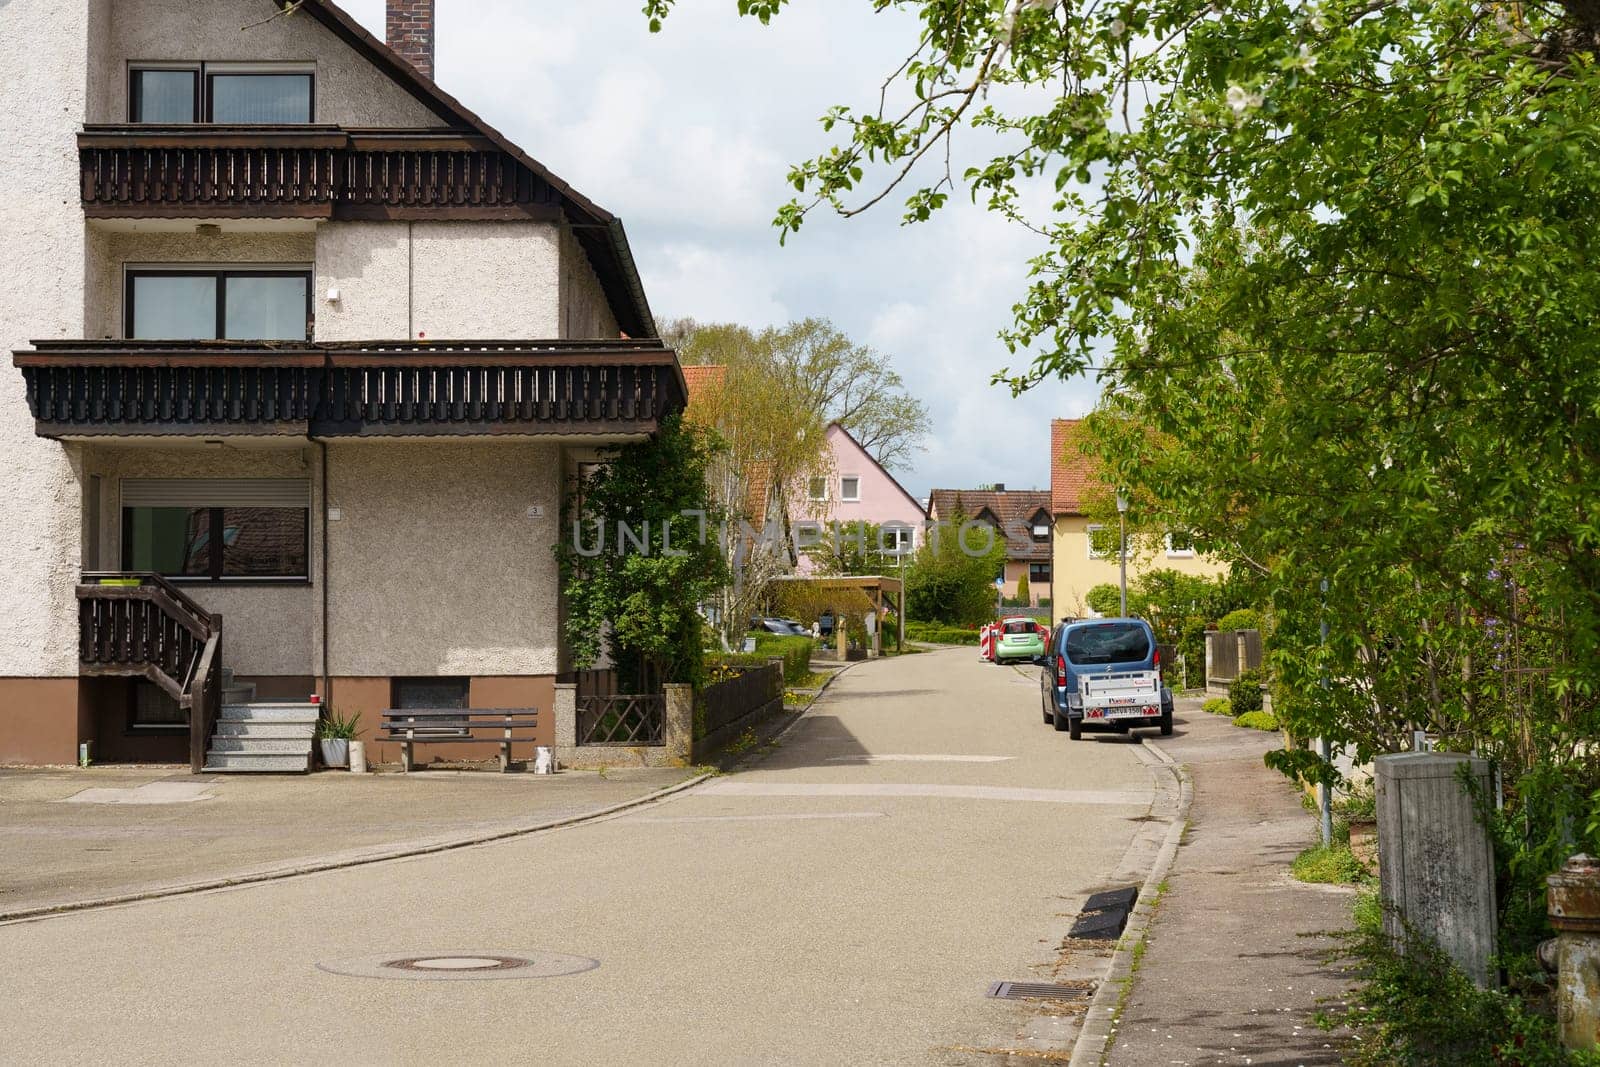 Houses along the road, cars in a German village. by Sd28DimoN_1976